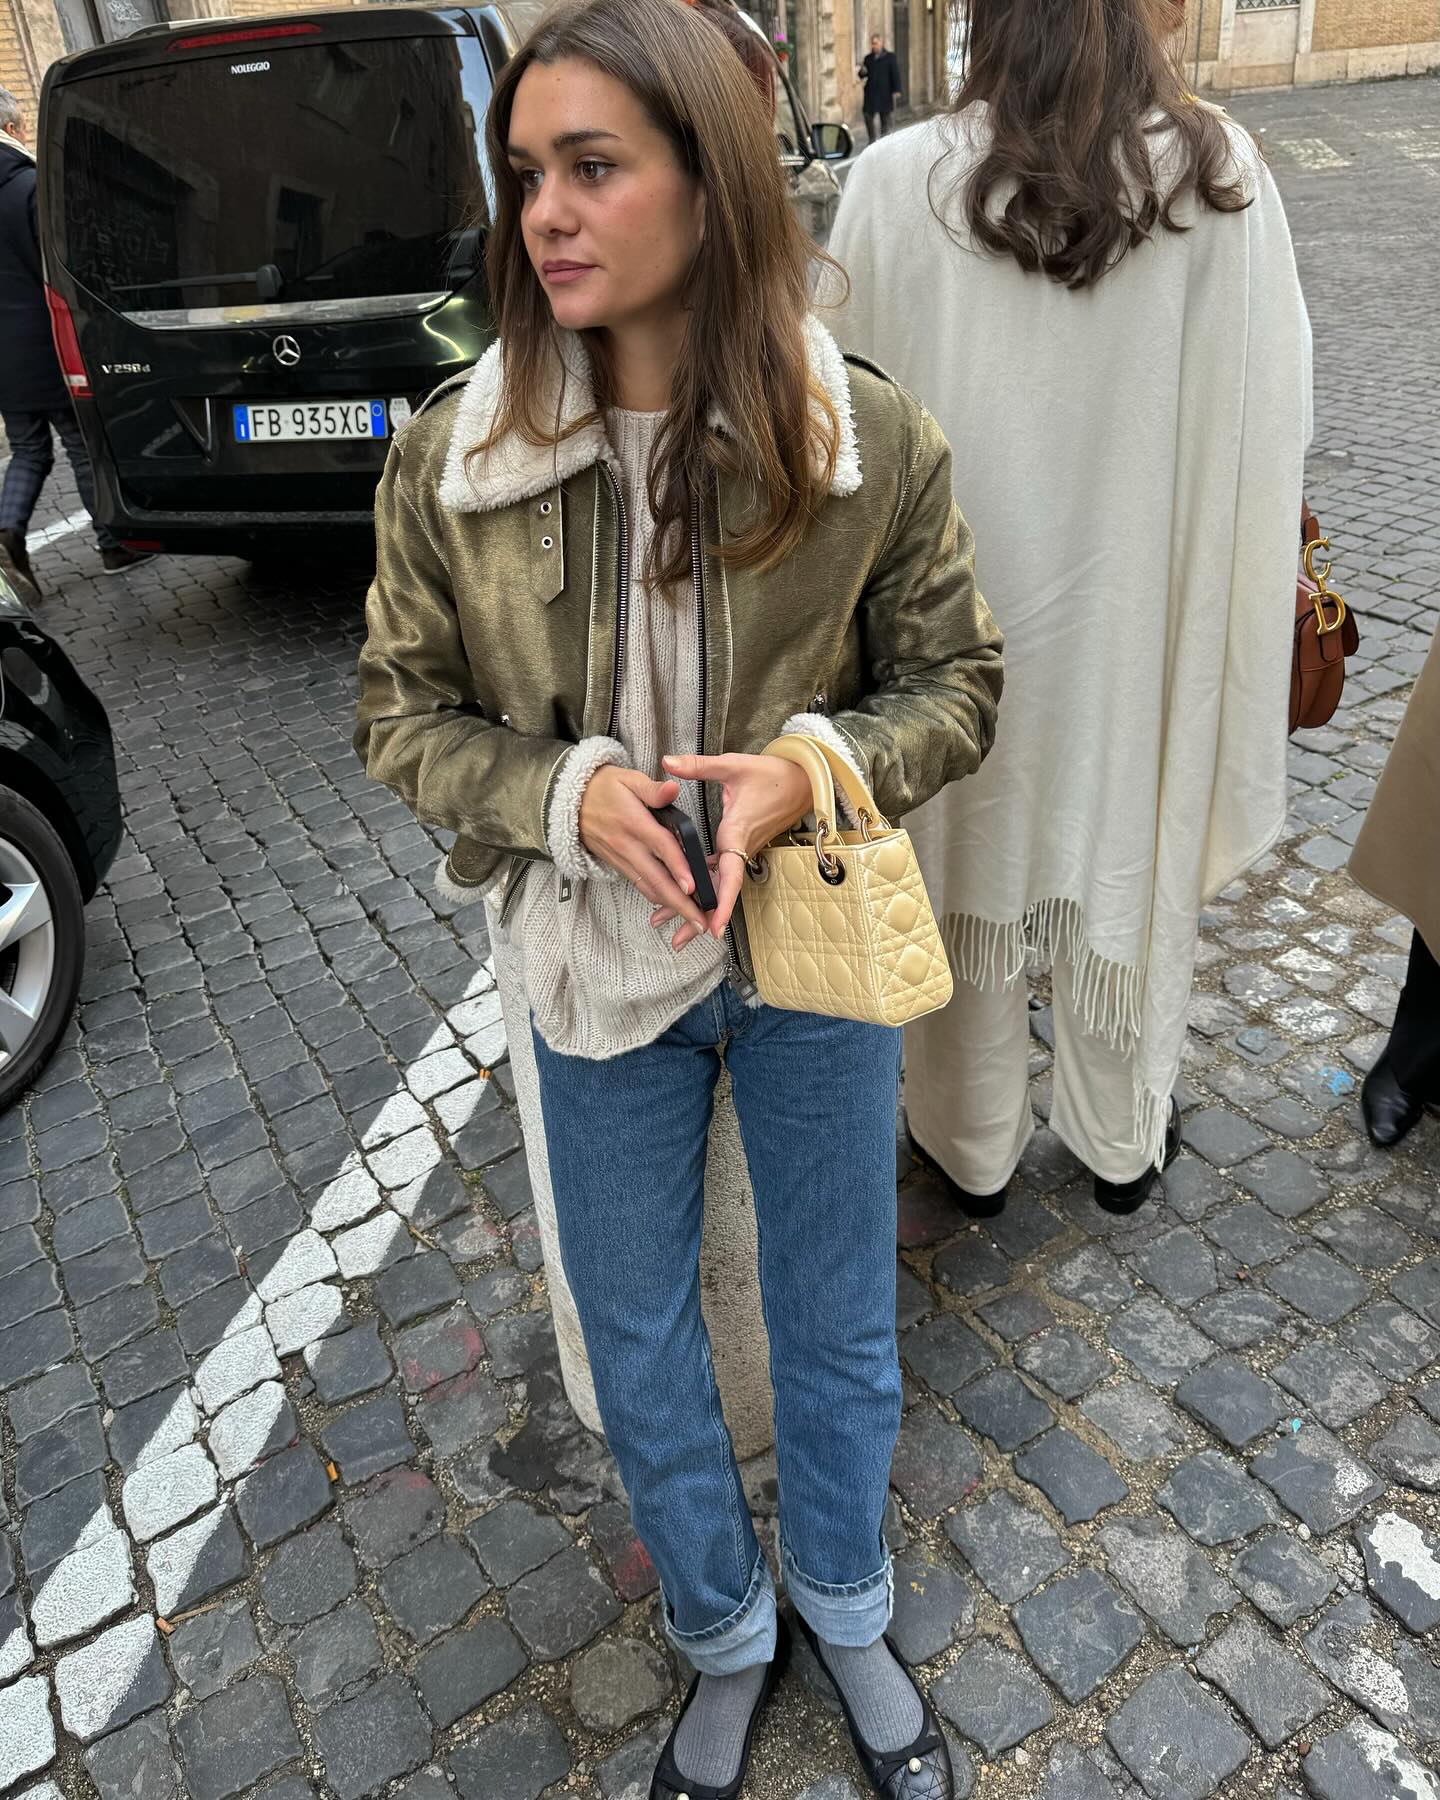 French fashion influencer poses on the cobblestone streets of Paris in a shearling lined jacket, neutral sweater, yellow mini Dior bag, cuffed jeans, gray socks, and black ballet flats